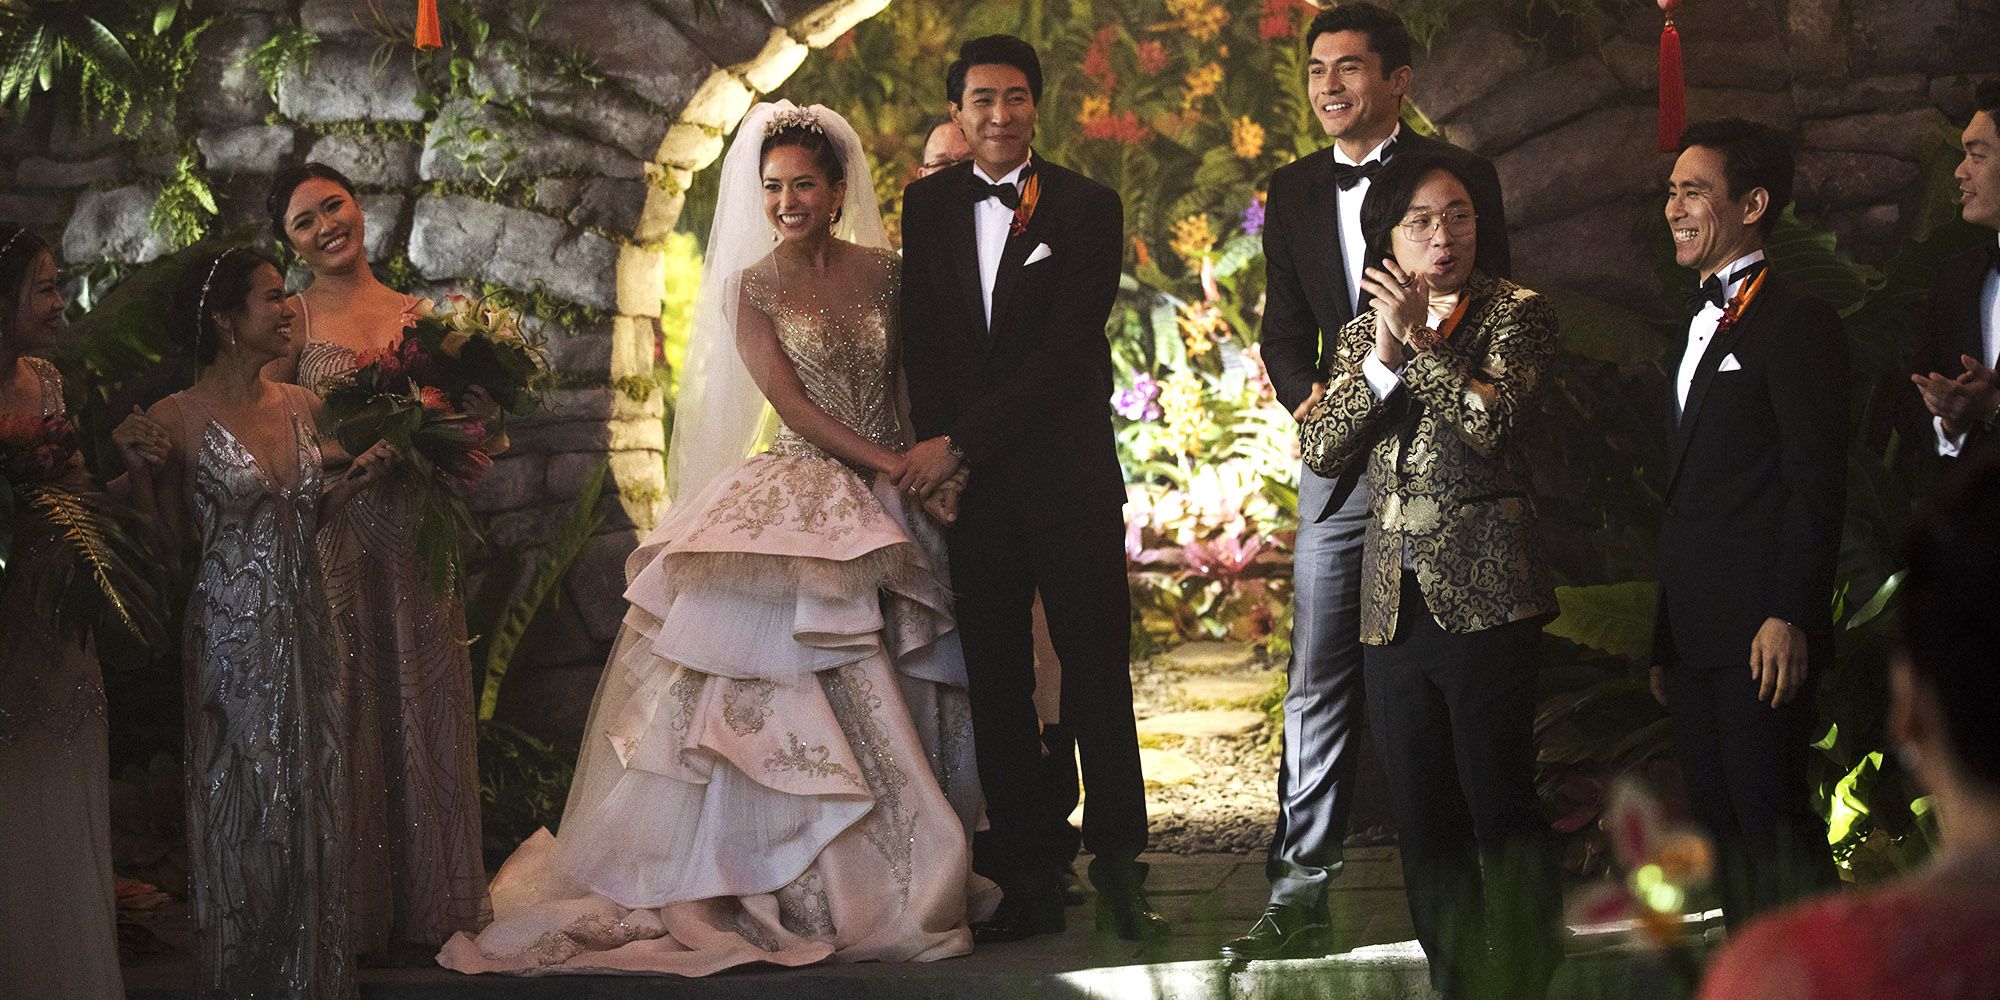 How the Crazy Rich Asians Wedding Scene Came Together